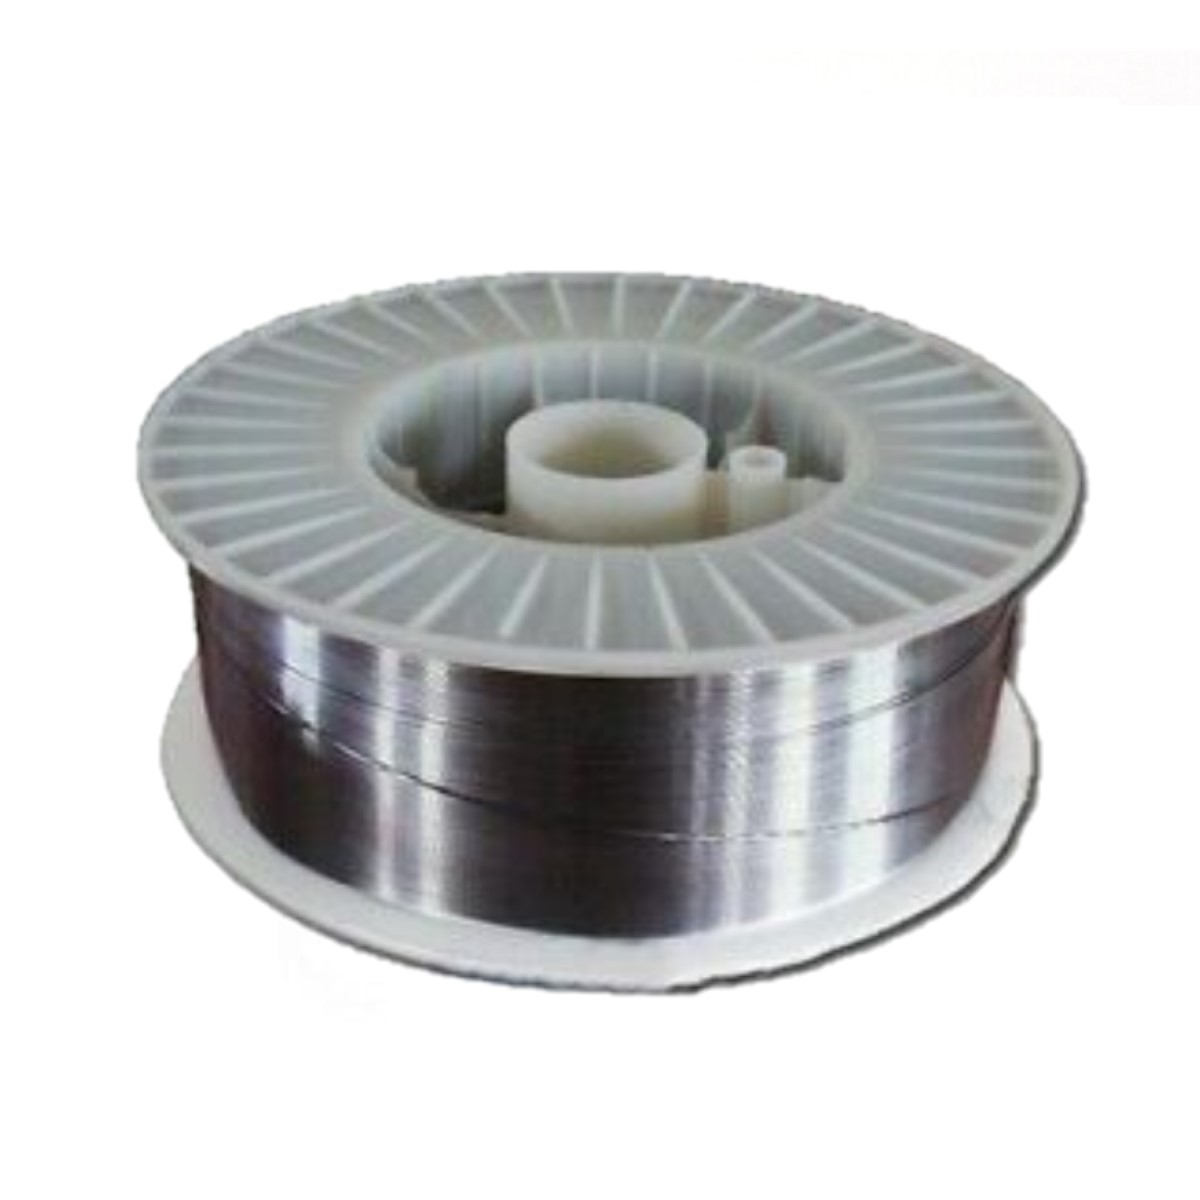 welding product - Mig 71T-1 wire